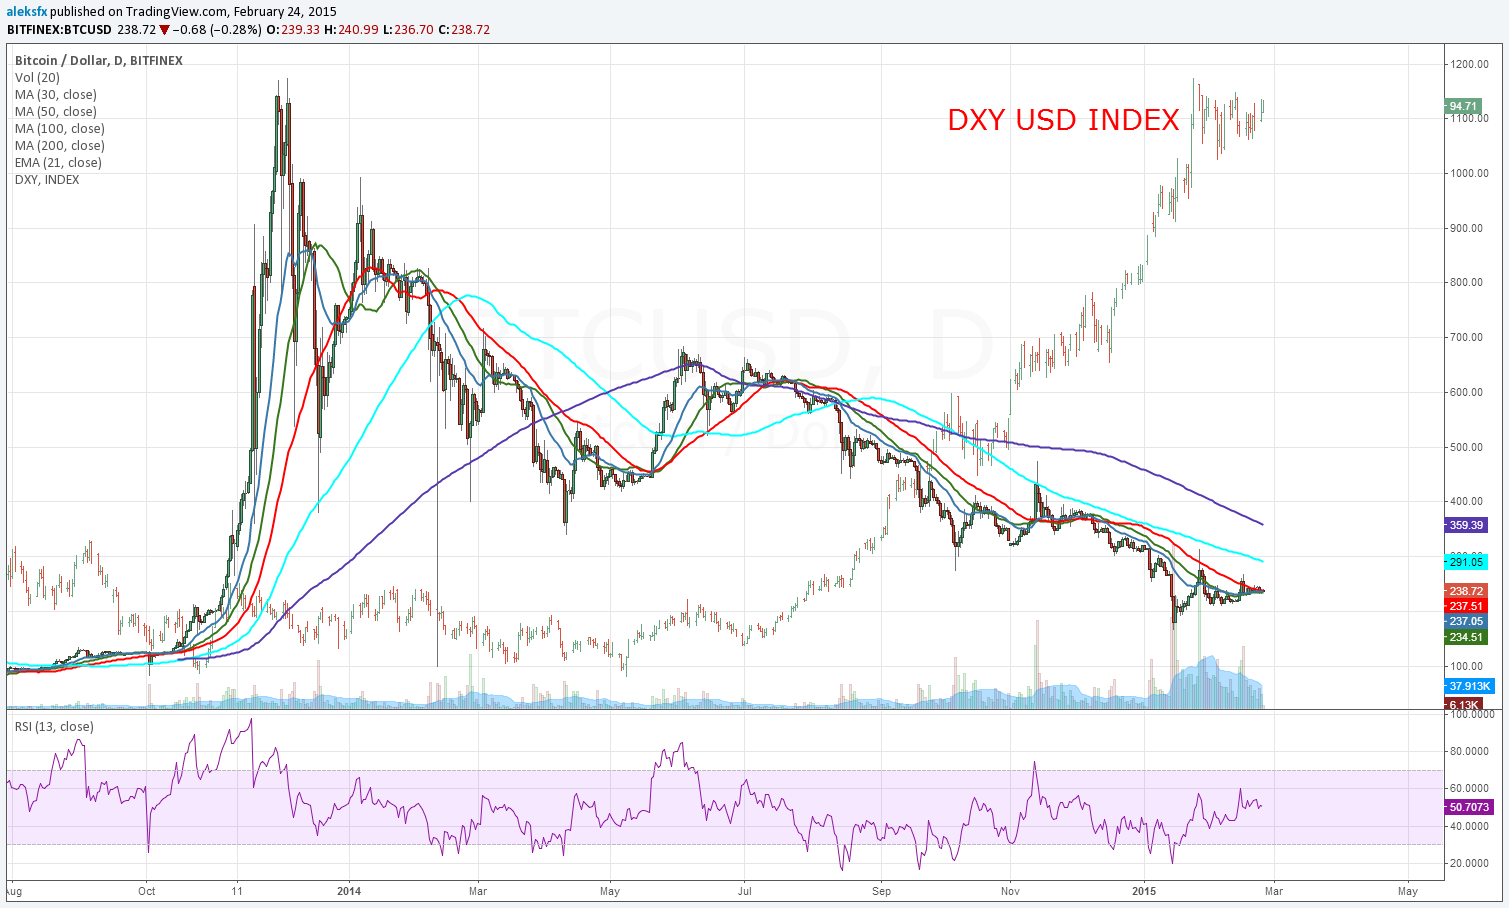 Bitcoin Usd  in comparison to the DXY USD Index Source: Chart TradingView.com